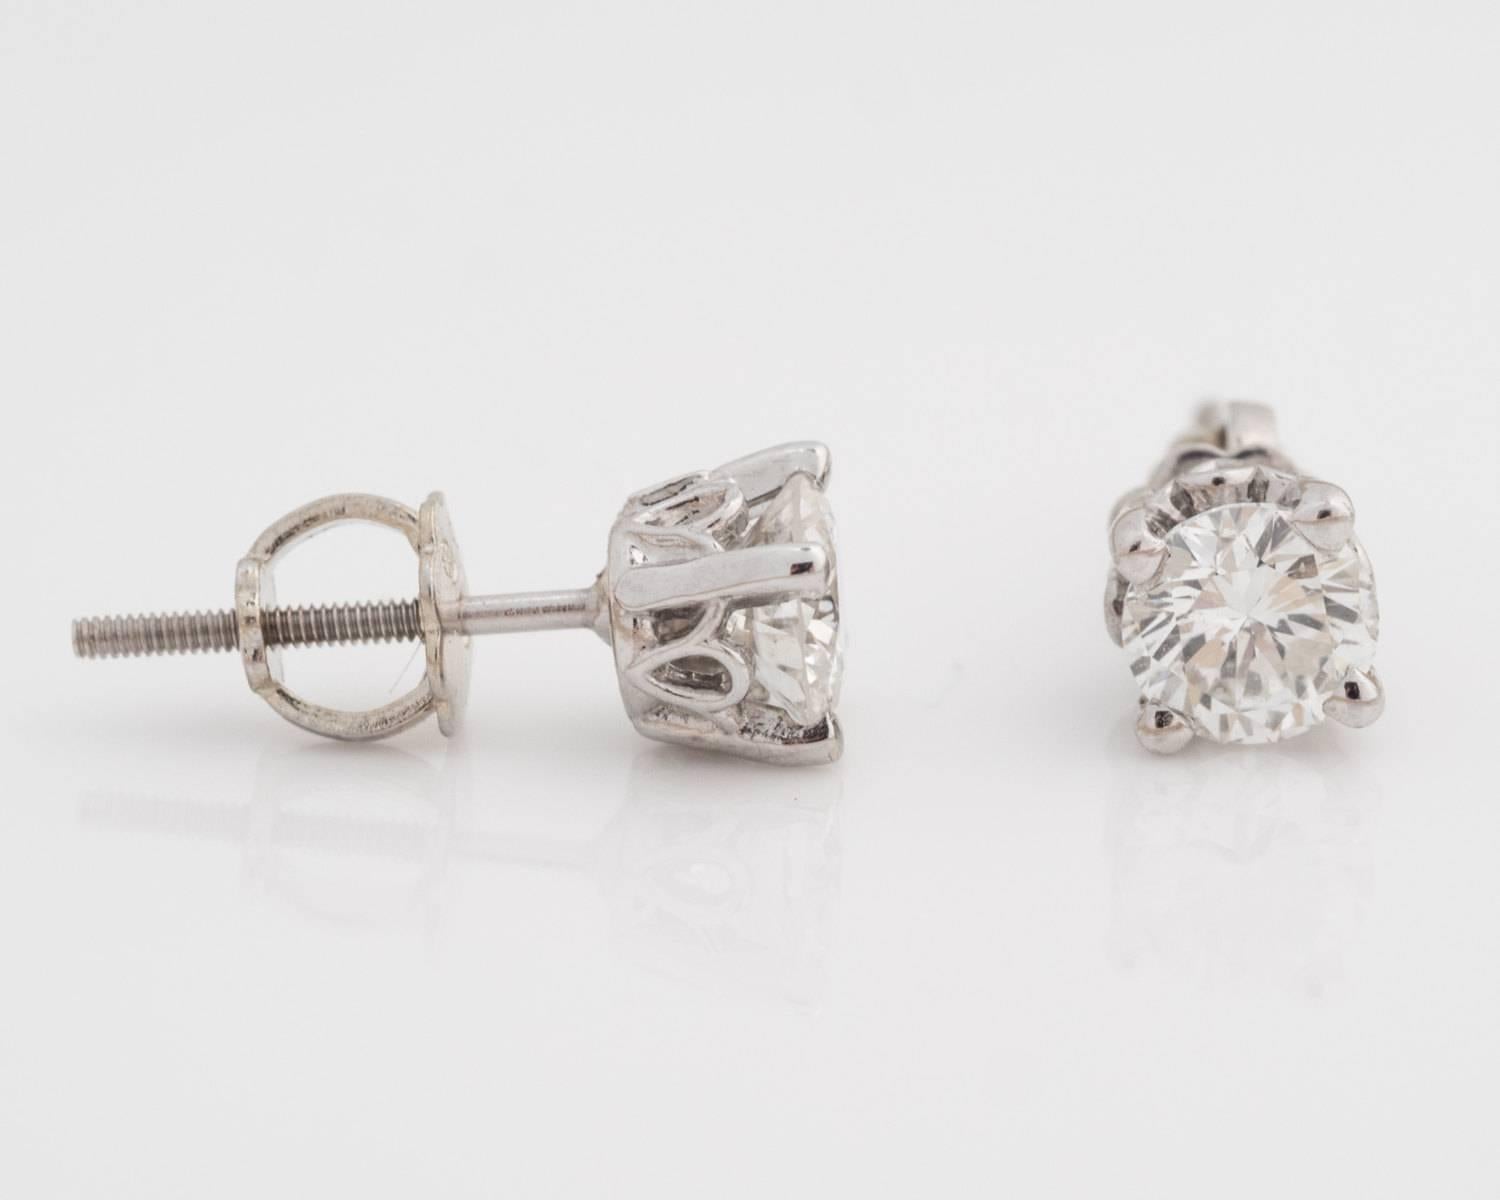 When we make custom jewelry, we like to go all out! And with .80 carats of diamonds between these two studs, you won't be disappointed! These are the perfect stud earrings for any occasion. The dazzling diamonds always look good, no matter where you